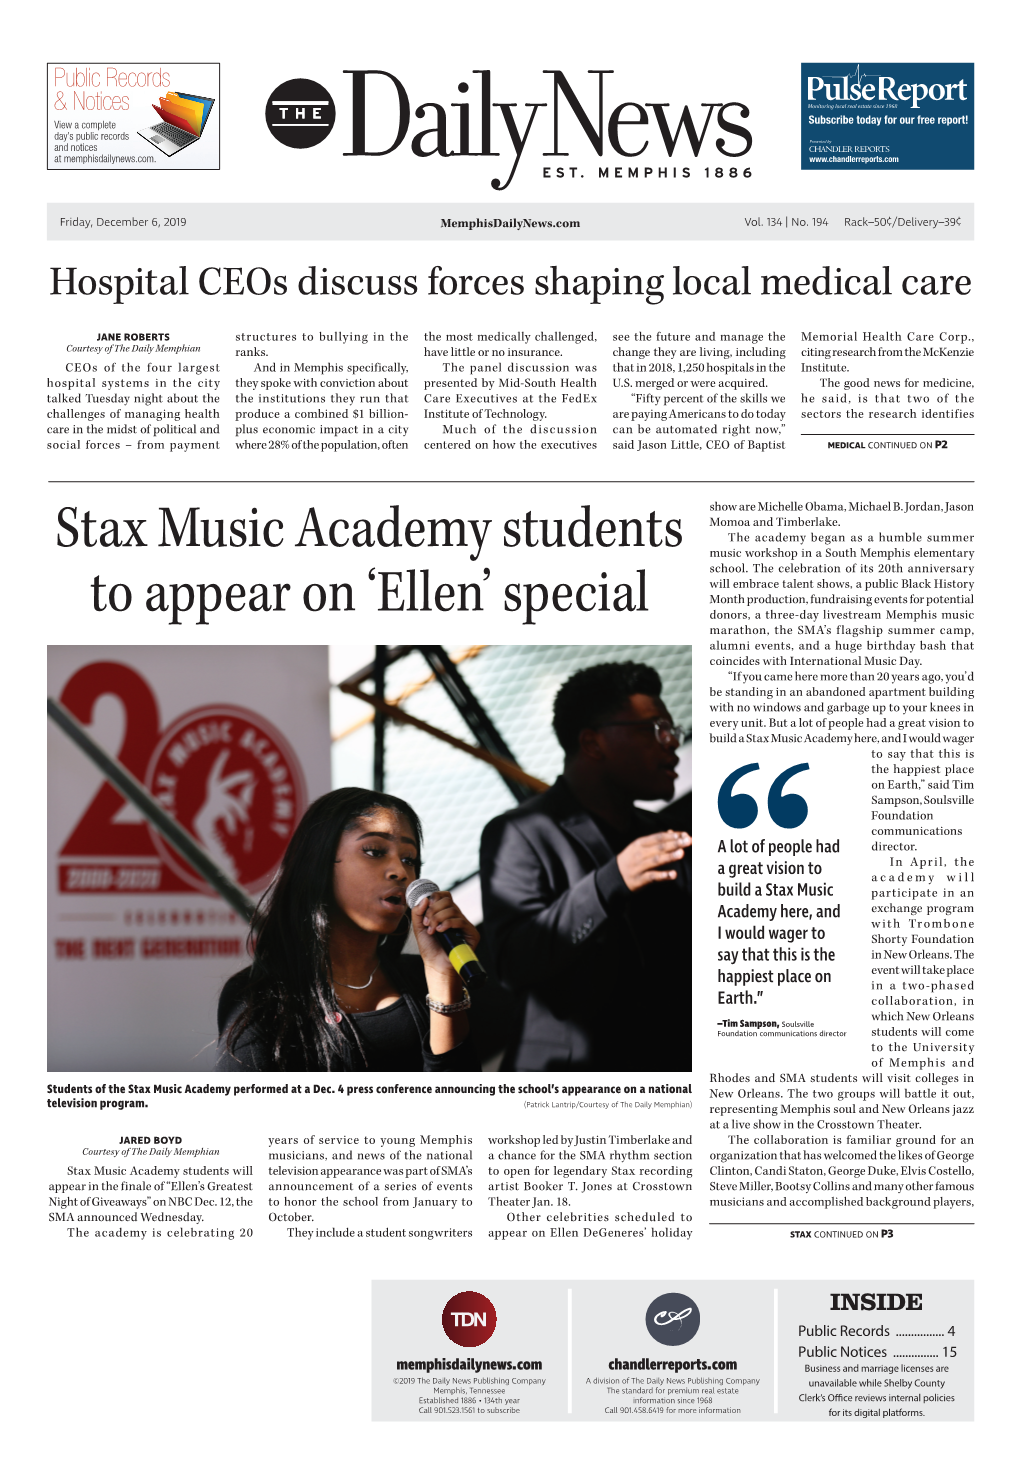 Stax Music Academy Students to Appear On